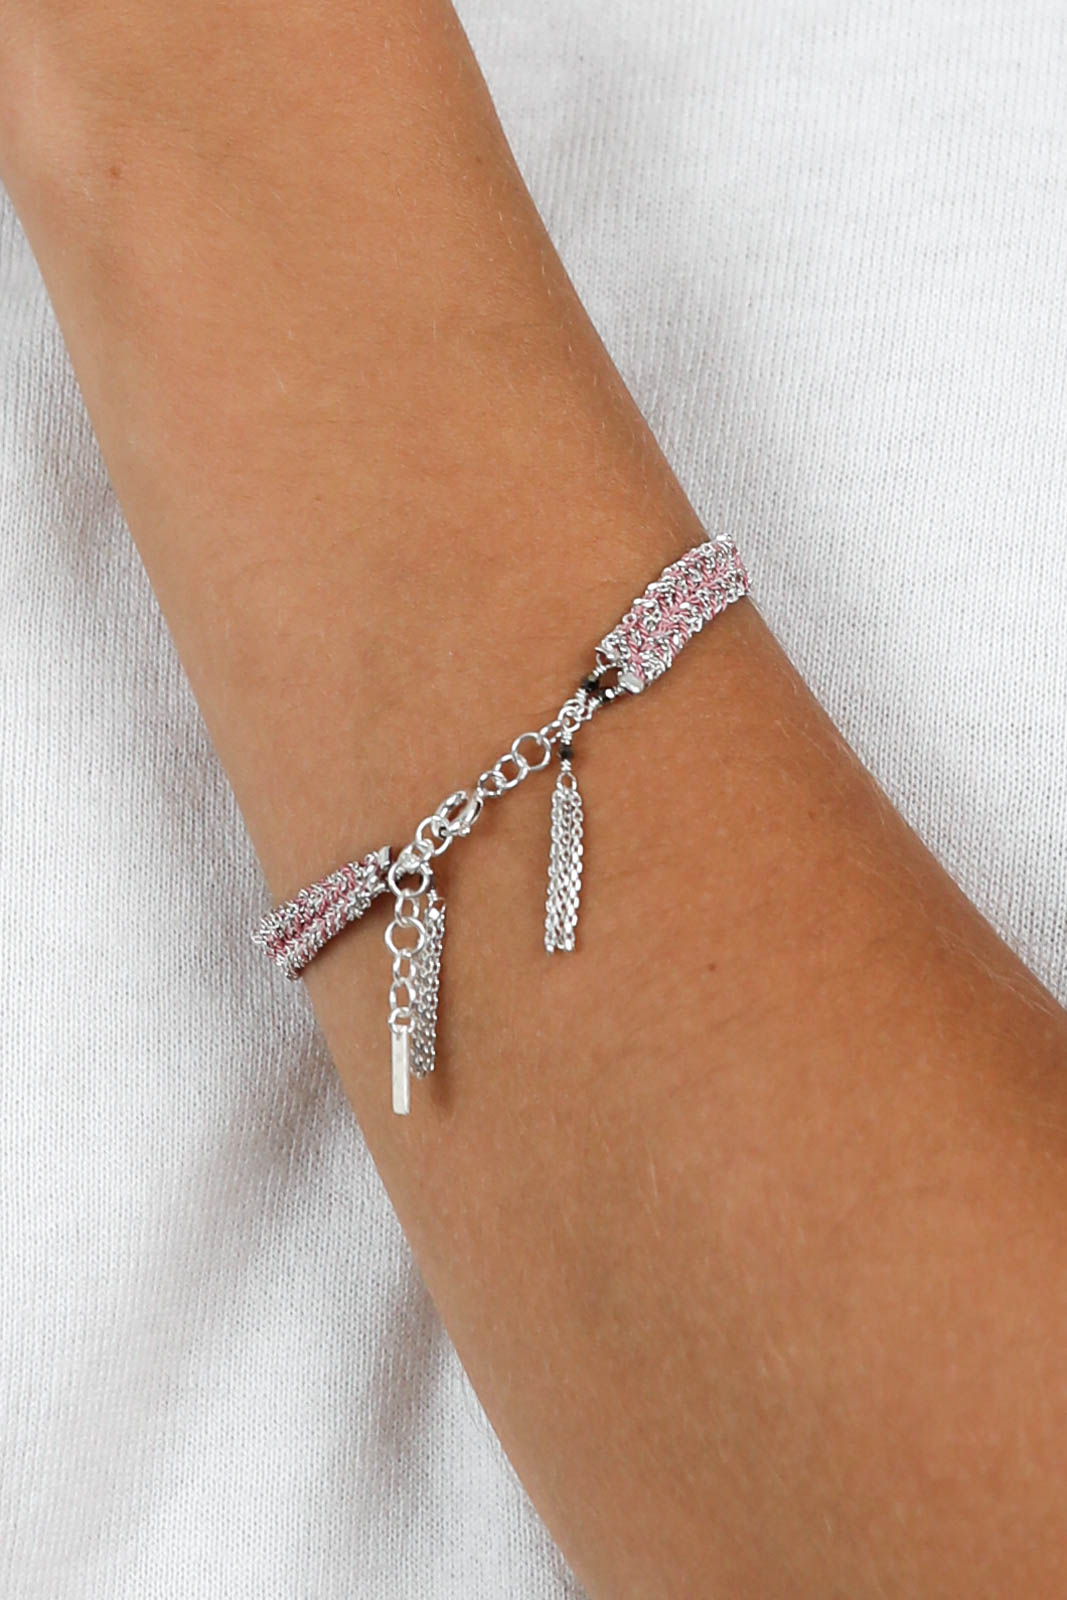 Armband N° 183 in Silver/Pink